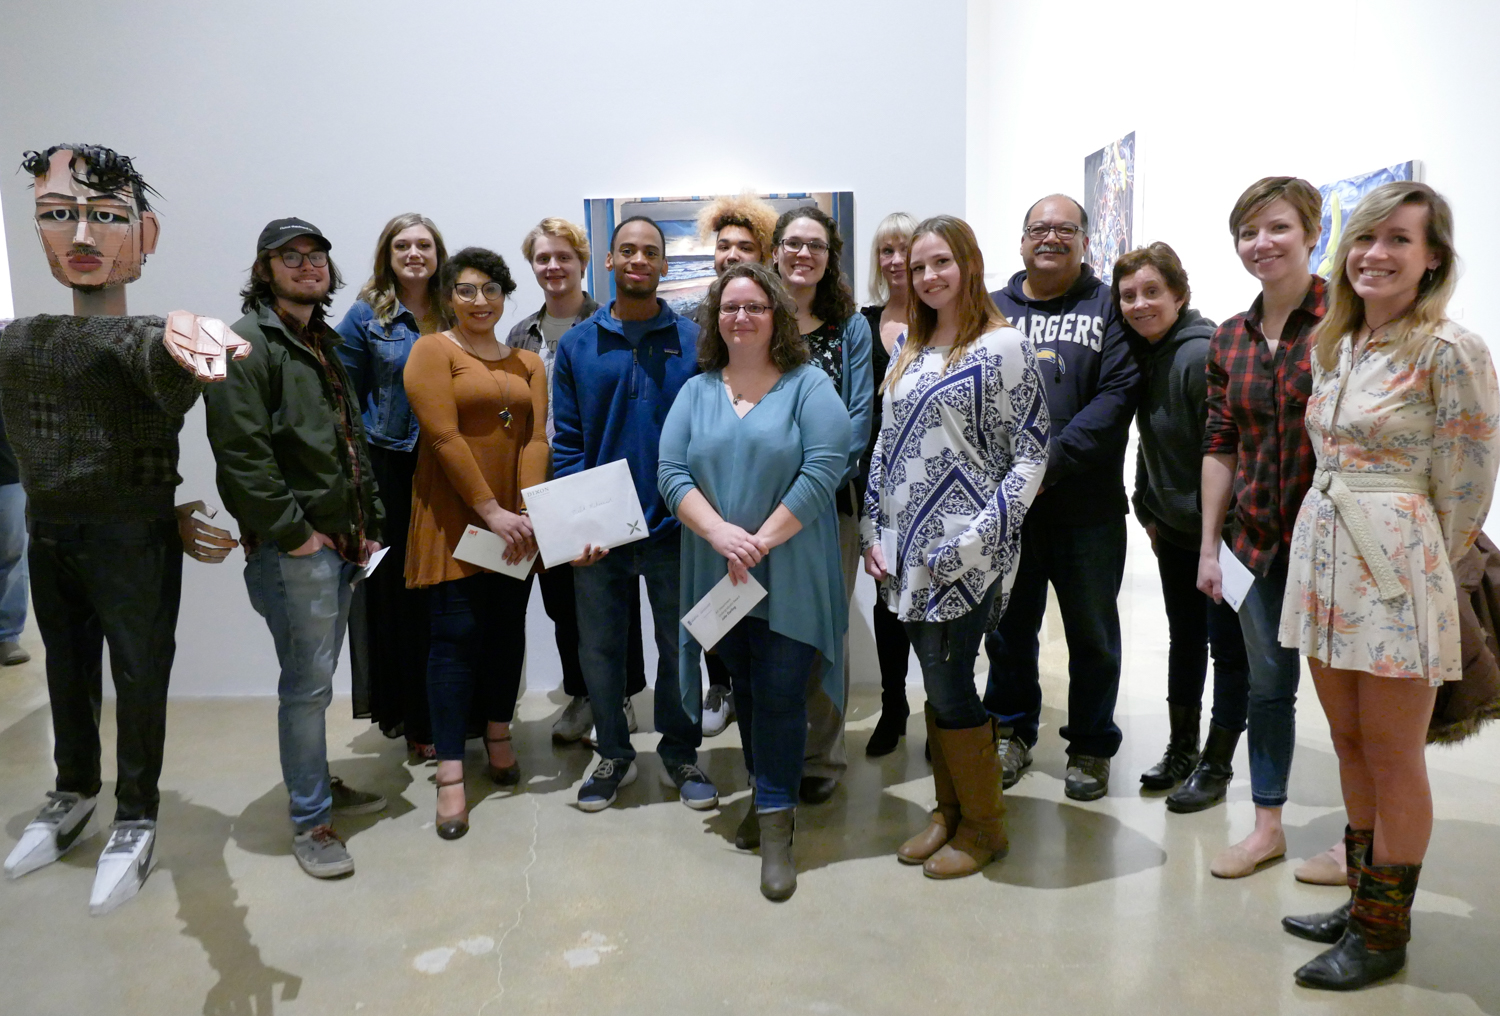 35th Annual Juried Student Exhibition Awards Winners